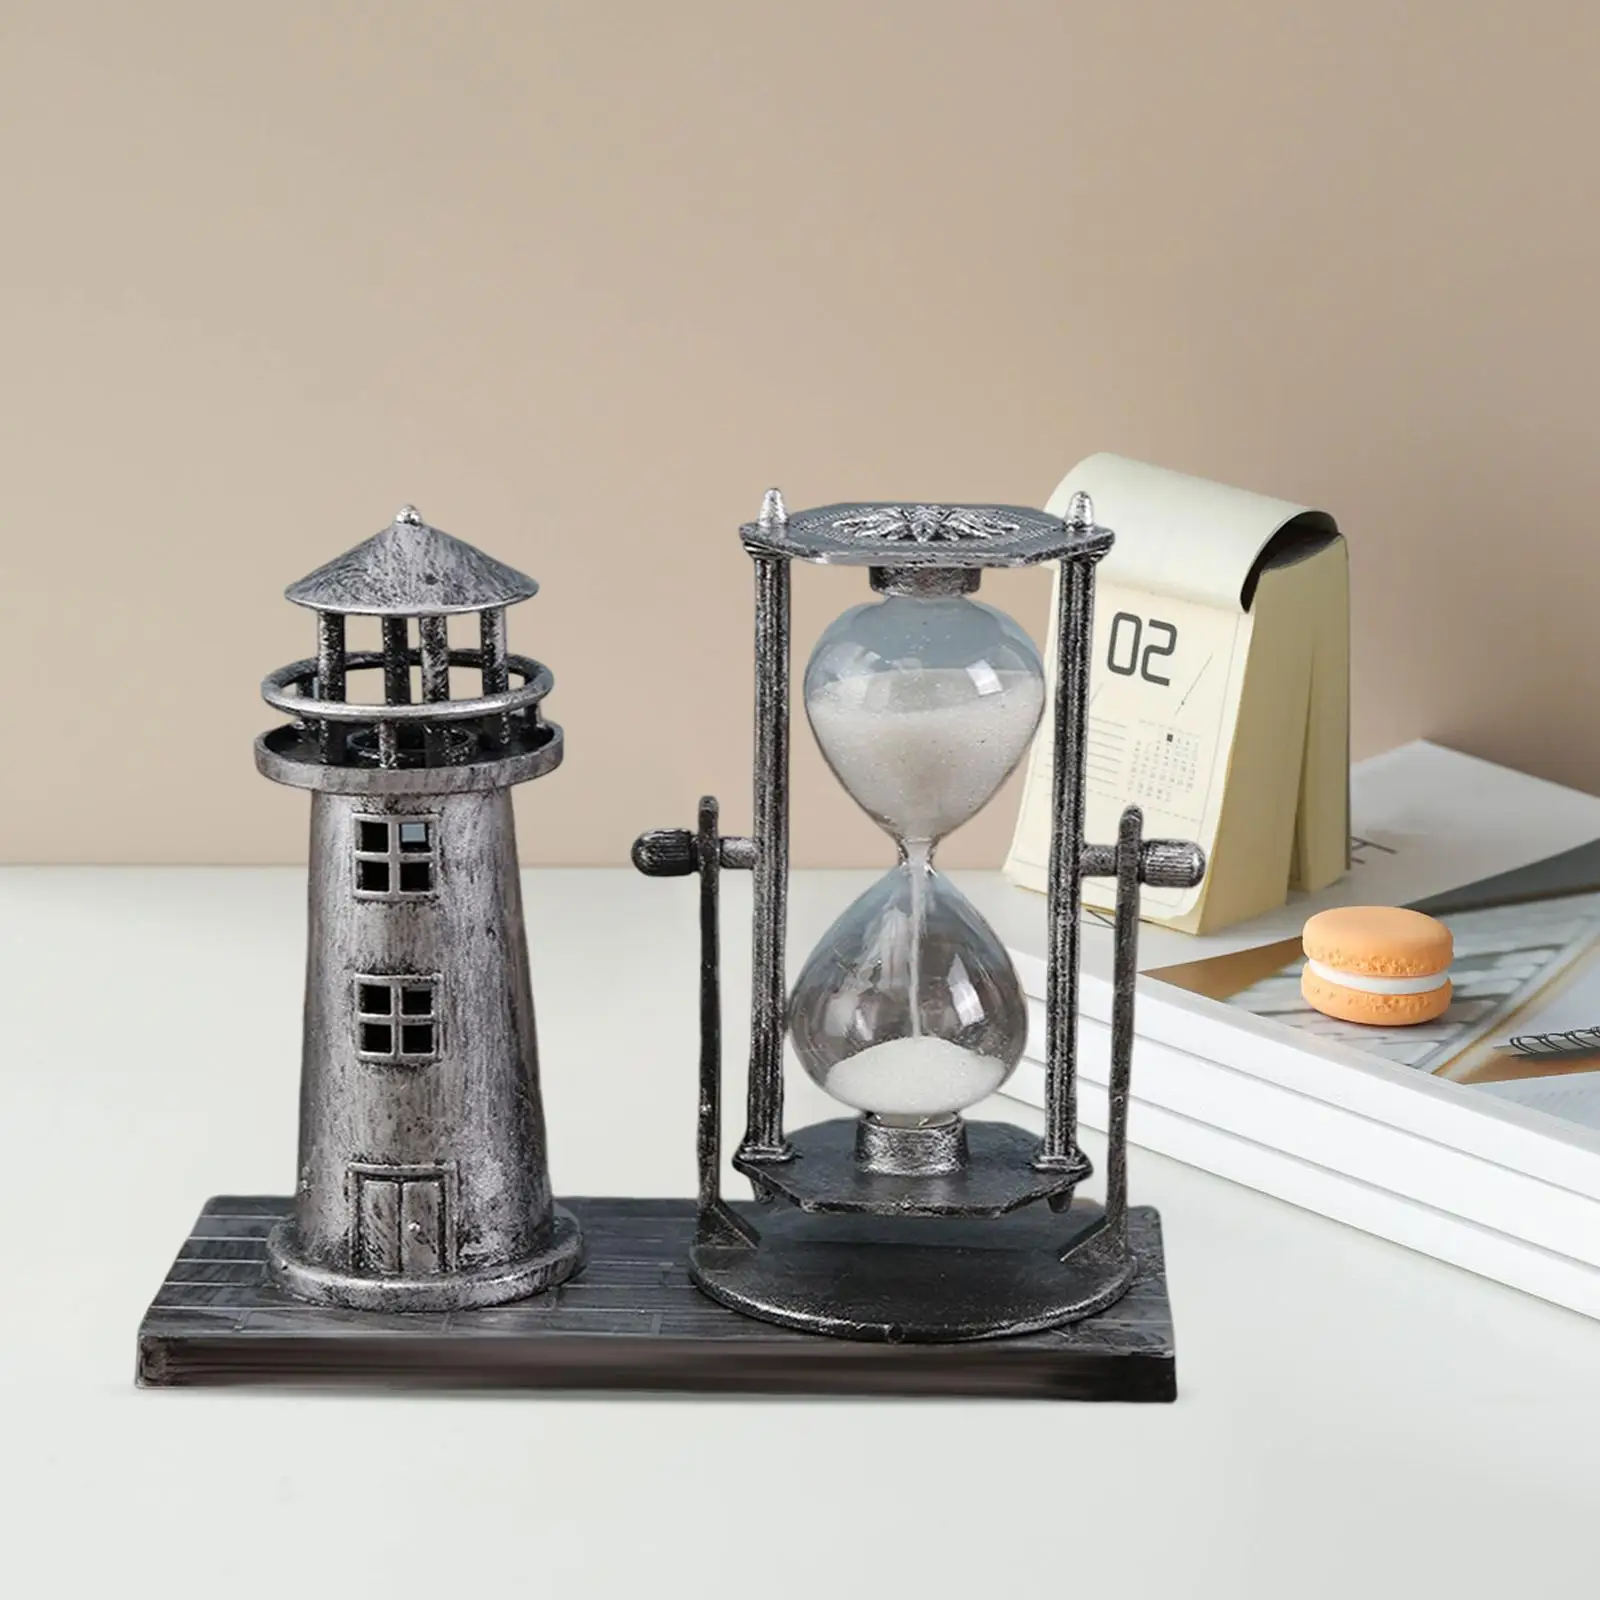 Retro Style Hourglass Sandglass Decor Lighthouse Tower Exquisite Sand Timer for Centerpieces Home Cabinet Living Room Office